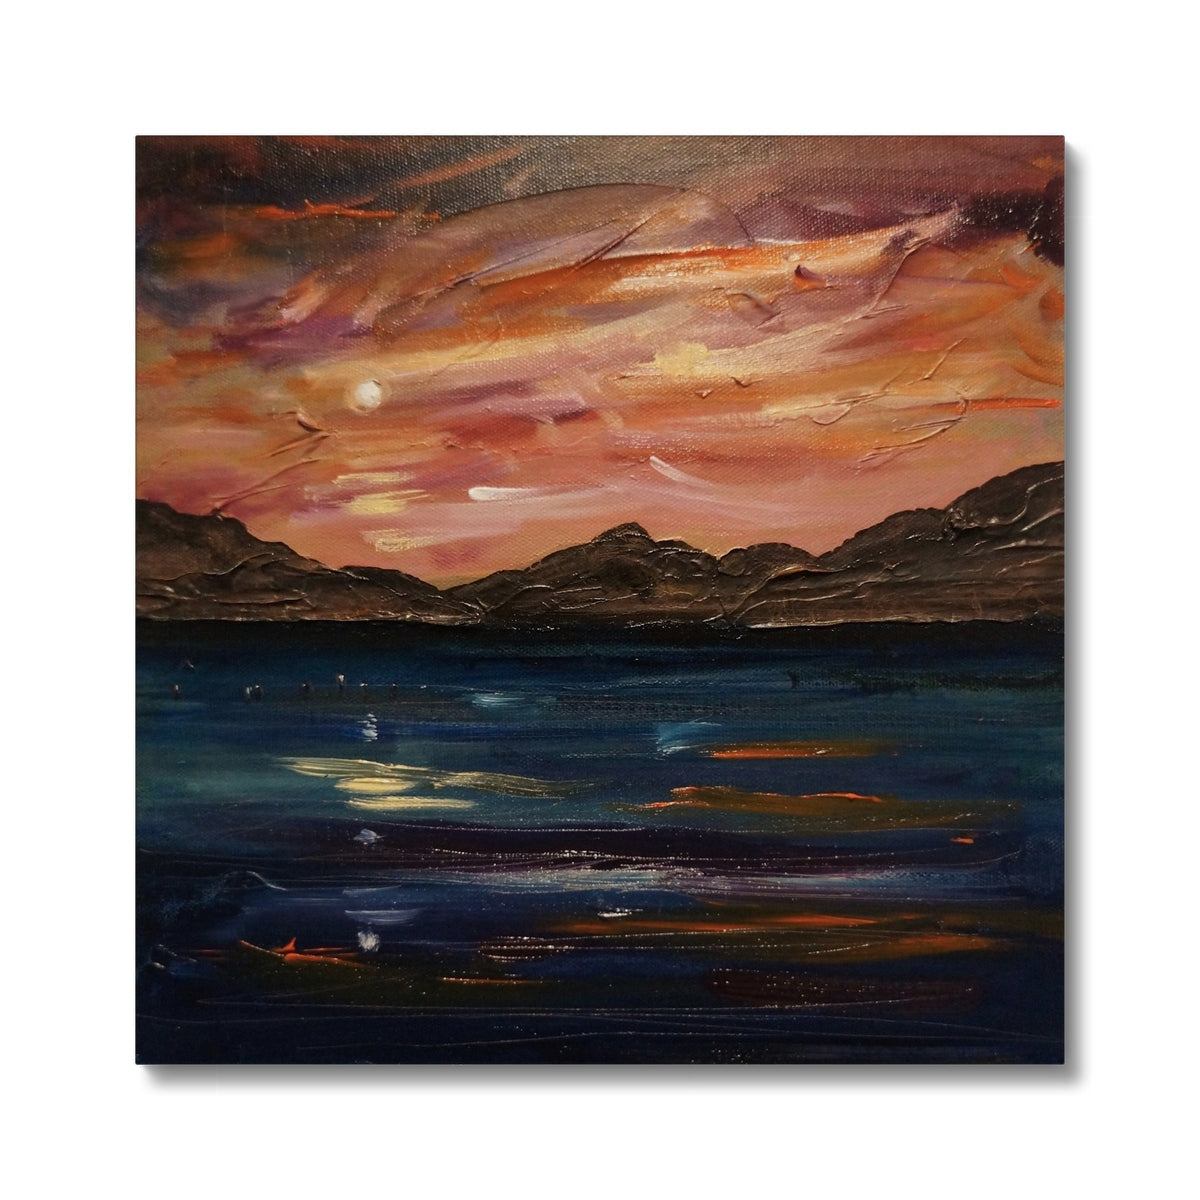 Loch Ness Moonset Painting | Canvas From Scotland-Contemporary Stretched Canvas Prints-Scottish Lochs & Mountains Art Gallery-24"x24"-Paintings, Prints, Homeware, Art Gifts From Scotland By Scottish Artist Kevin Hunter